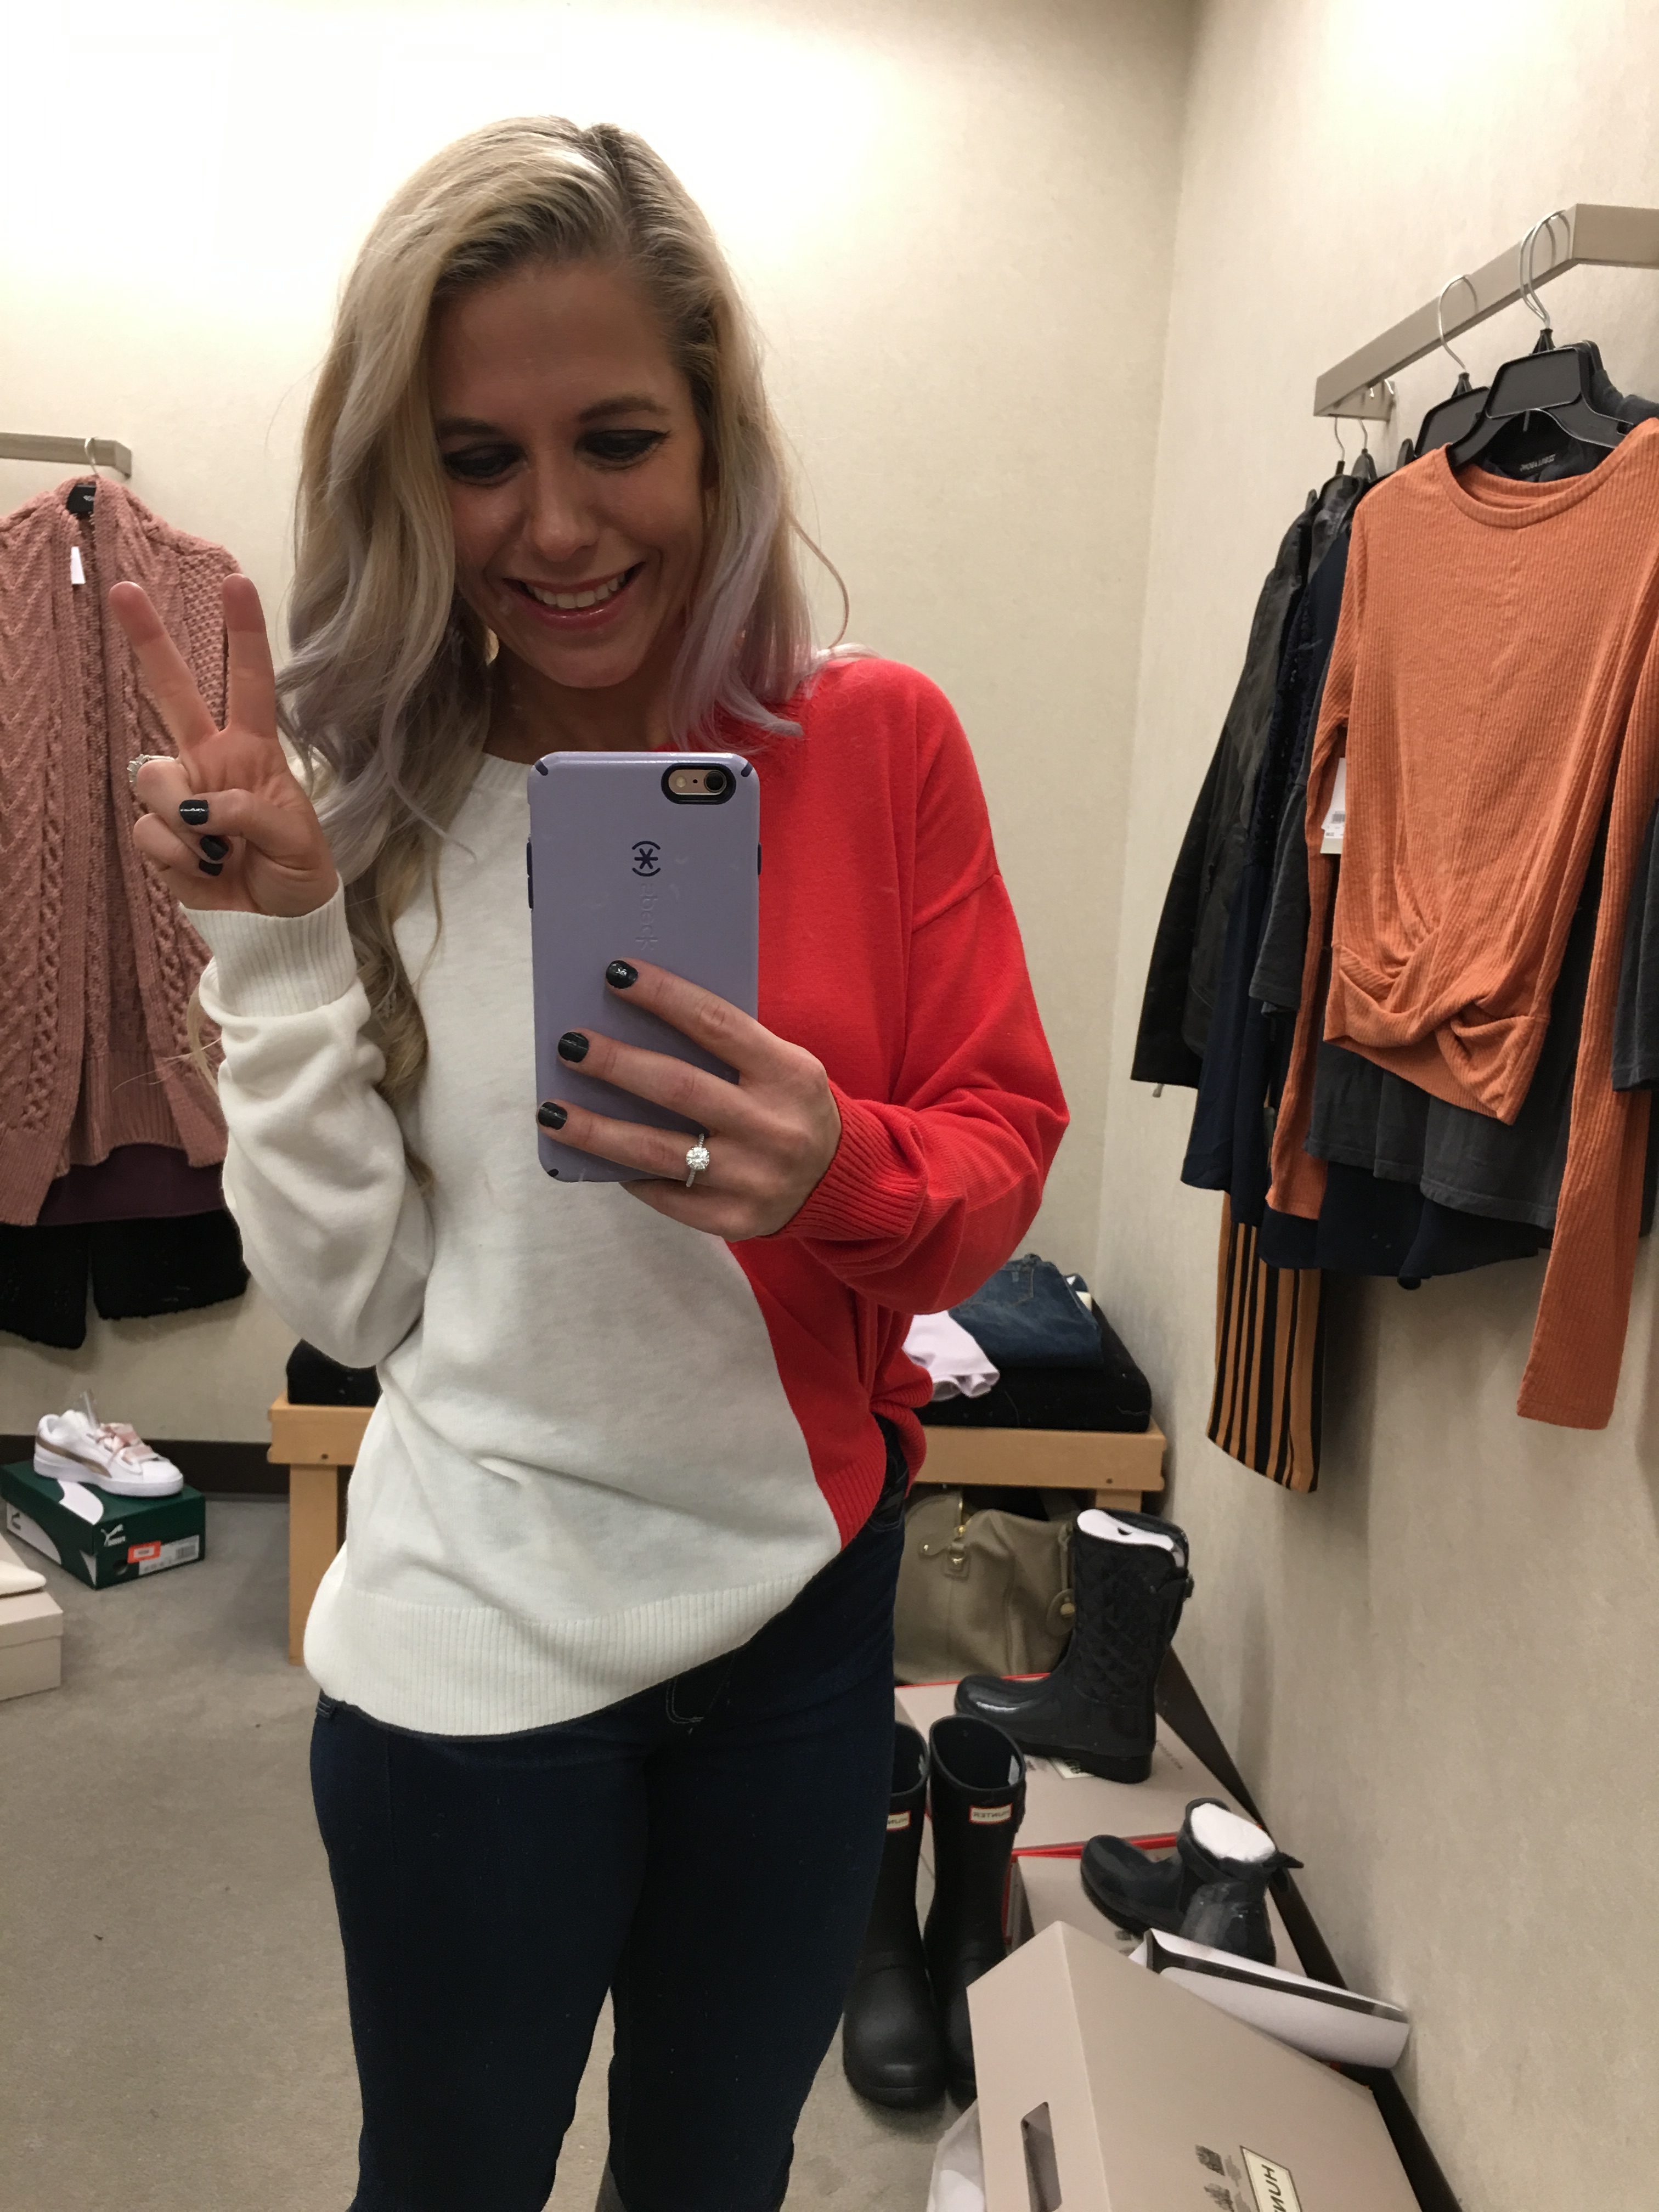 Nordstrom Anniversary Sale 2018 Try On Session Petite Fashion Blogger NSALE - Fashion Blogger COVET by tricia showcases top picks from the 2018 Nordstrom Anniversary Sale. This NSALE try on session shows how top NSALE picks look on petite build. Nordstrom Anniversary Sale Dressing Room Diaries include top picks like Hunter boots, Paige denim, cardigan, moto jackets, and more. #NSALE #Nordstrom #NordstromAnniversarySale #NSALE2018 #NordyGirl #WomensFashion #WomensStyle #FashionBlogger #StyleBlogger #KansasCity